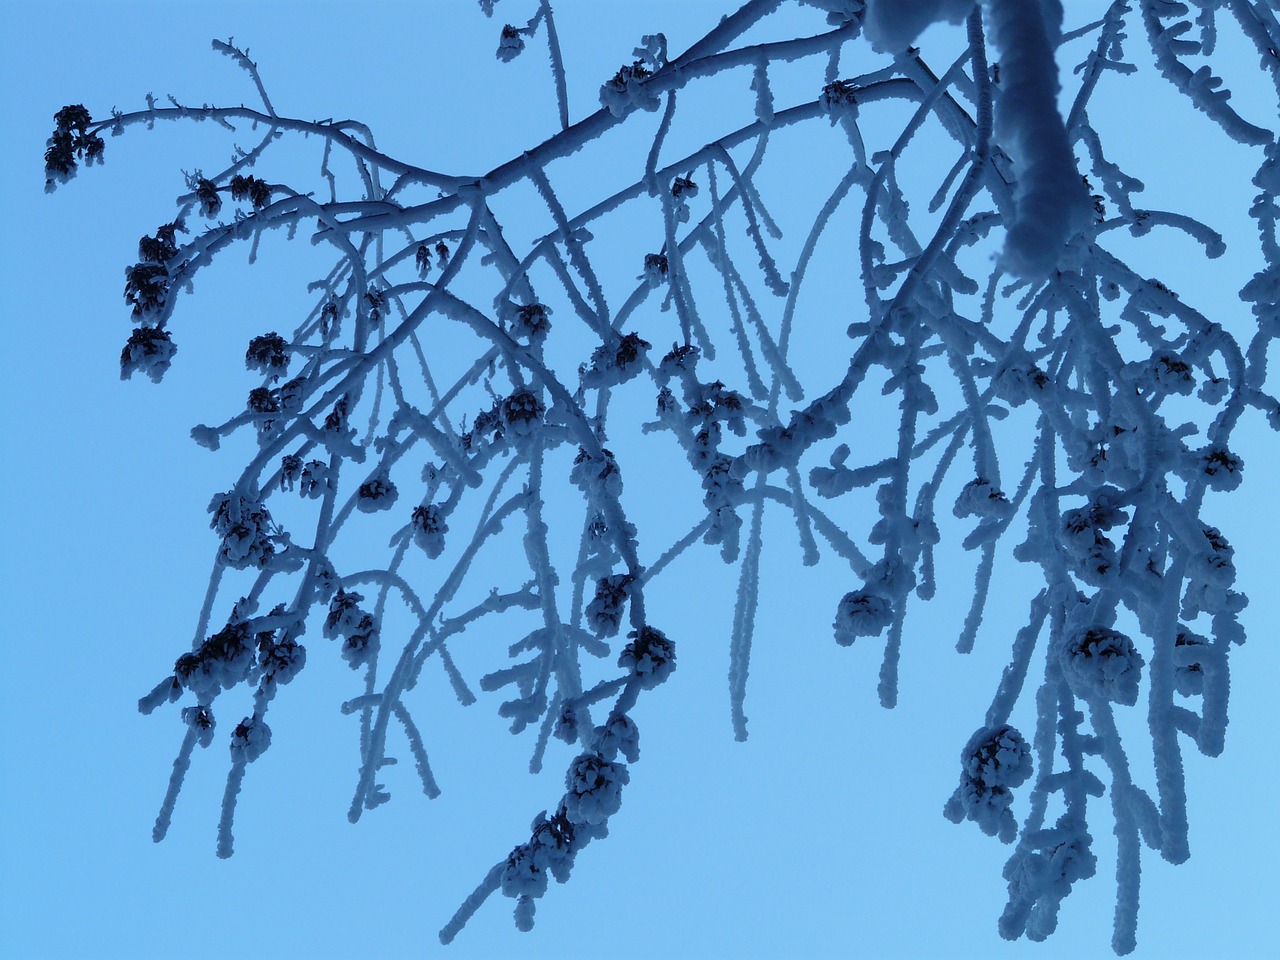 tree,branches,aesthetic,hoarfrost,iced,ice,winter,free pictures, free photos, free images, royalty free, free illustrations, public domain